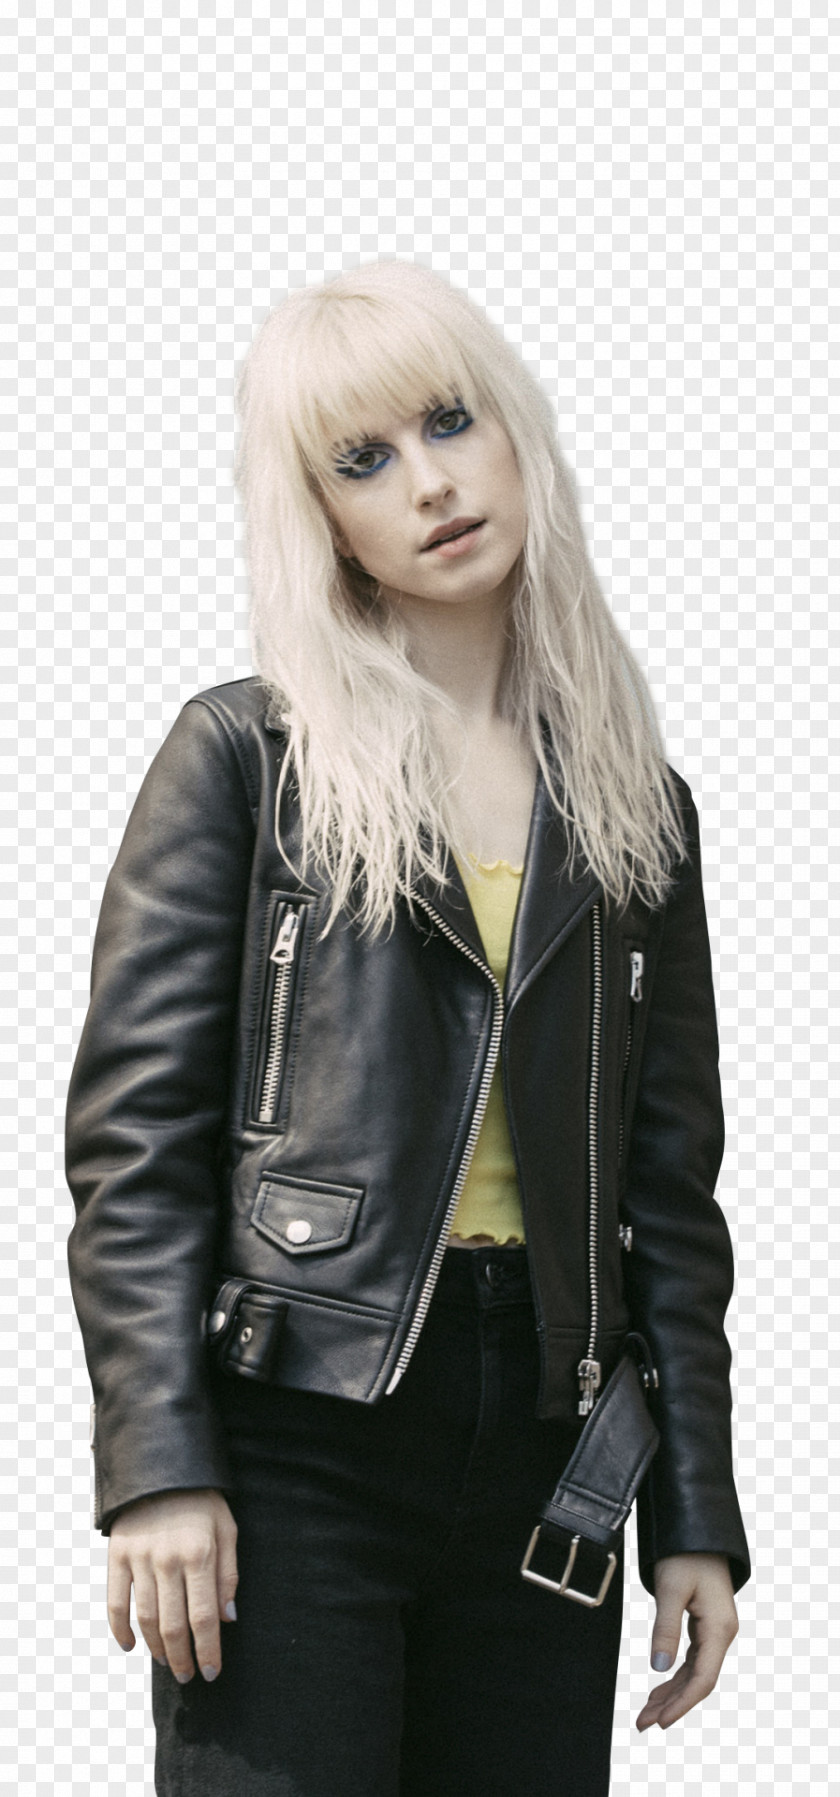 Hayley Williams Paramore HalfNoise KROQ Weenie Roast Photography PNG